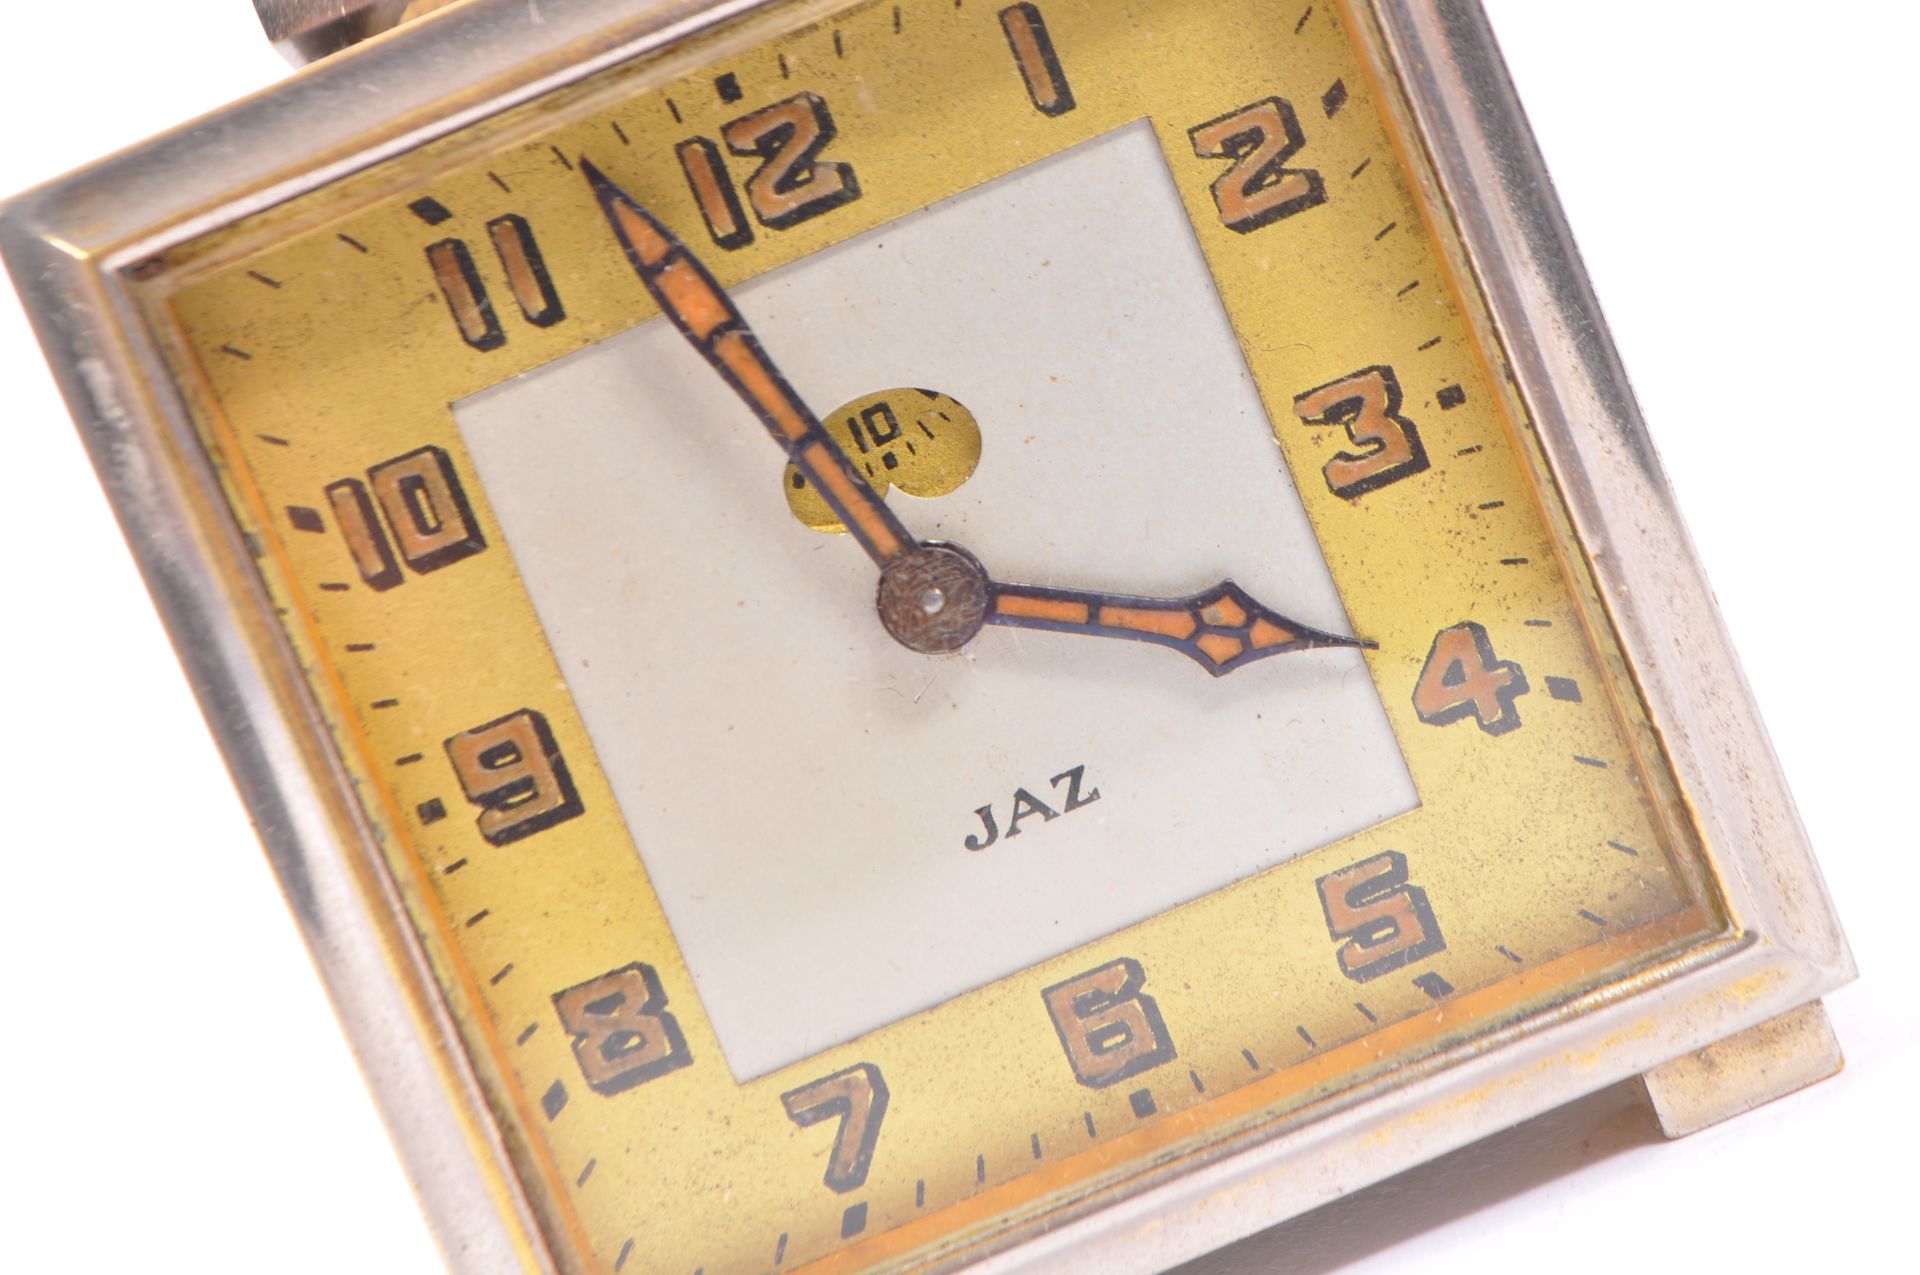 1930S ART DECO FRENCH TRAVEL CLOCK BY JAZ - Image 5 of 7